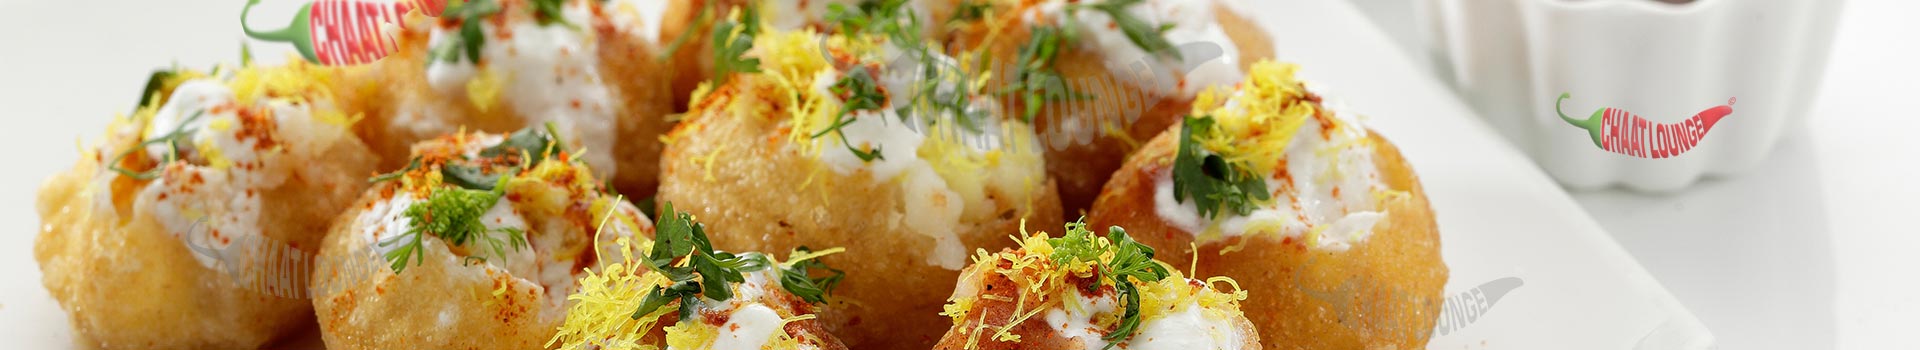 Chaat Menu, Fast Food Franchise India, South Indian Fast Food Franchise Menu